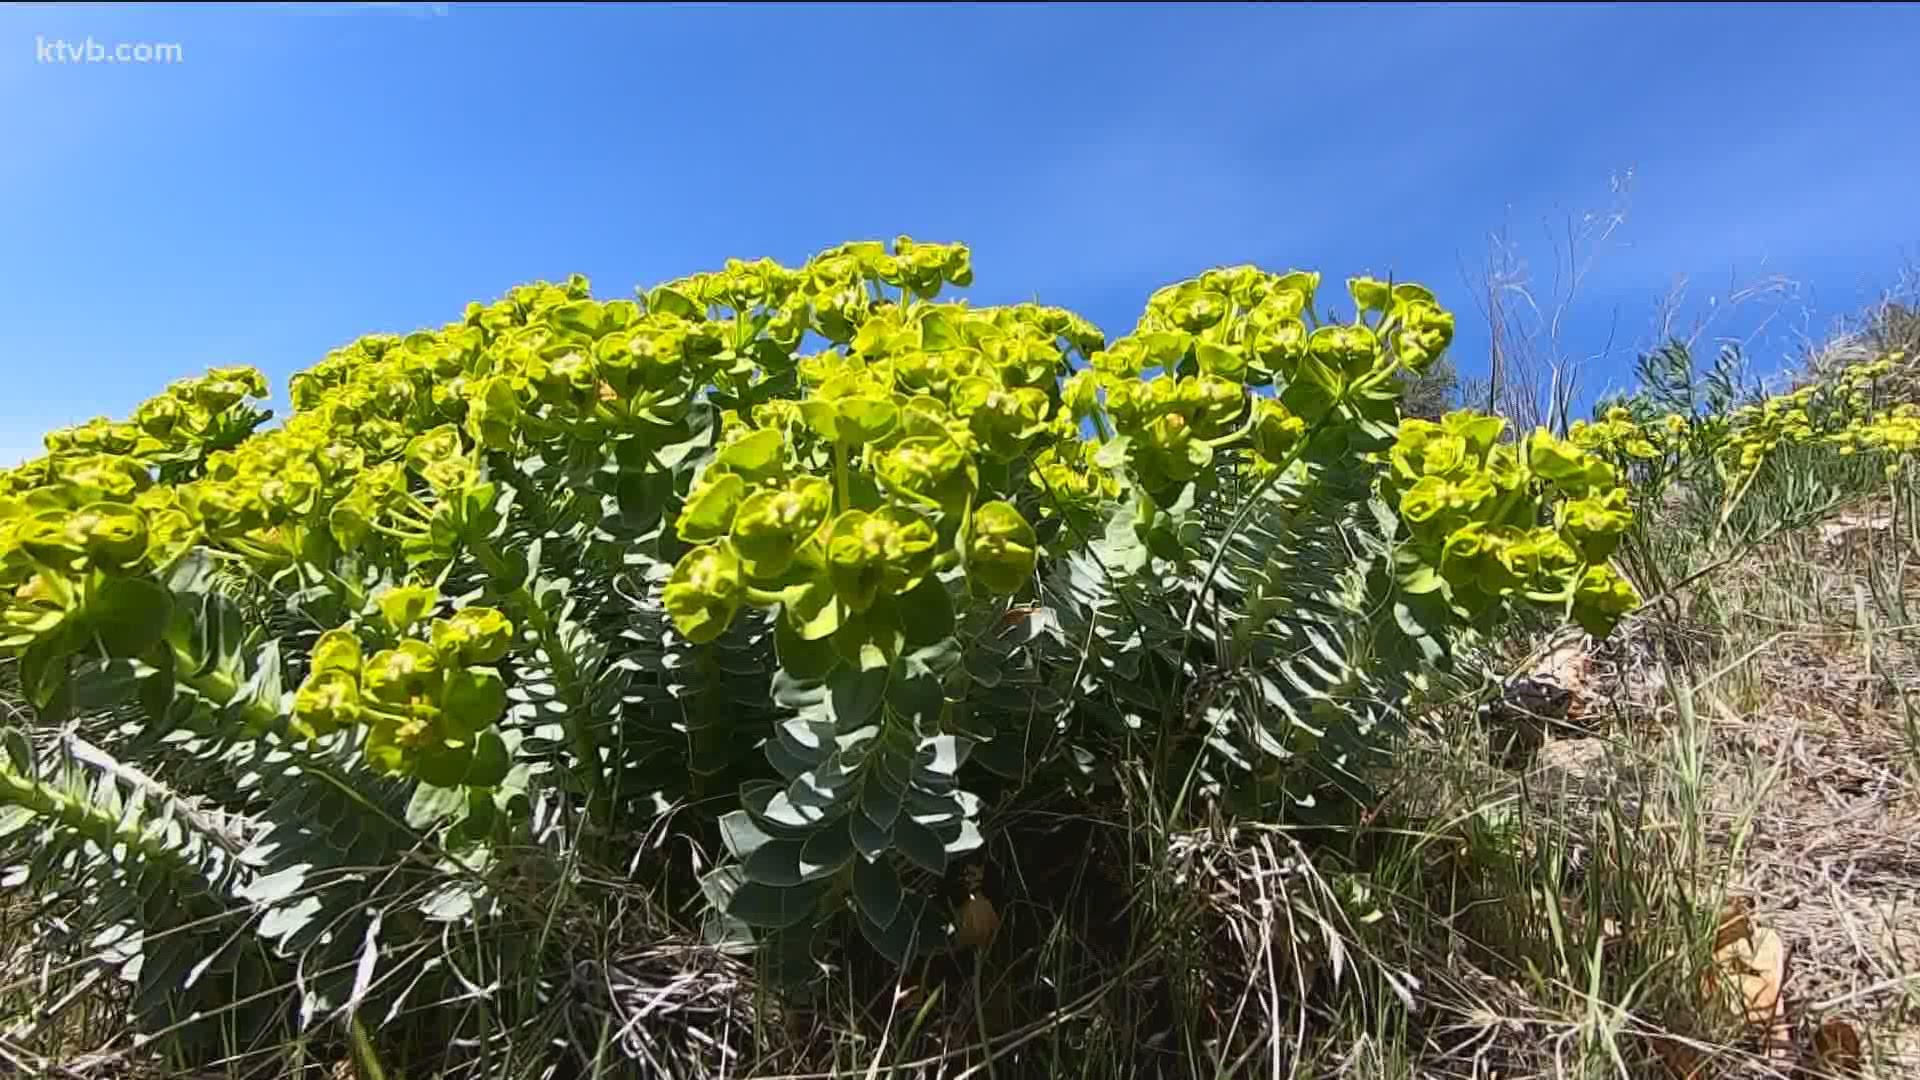 Myrtle spurge is toxic to humans and hospitalized two Utah children after having an allergic reaction to it.